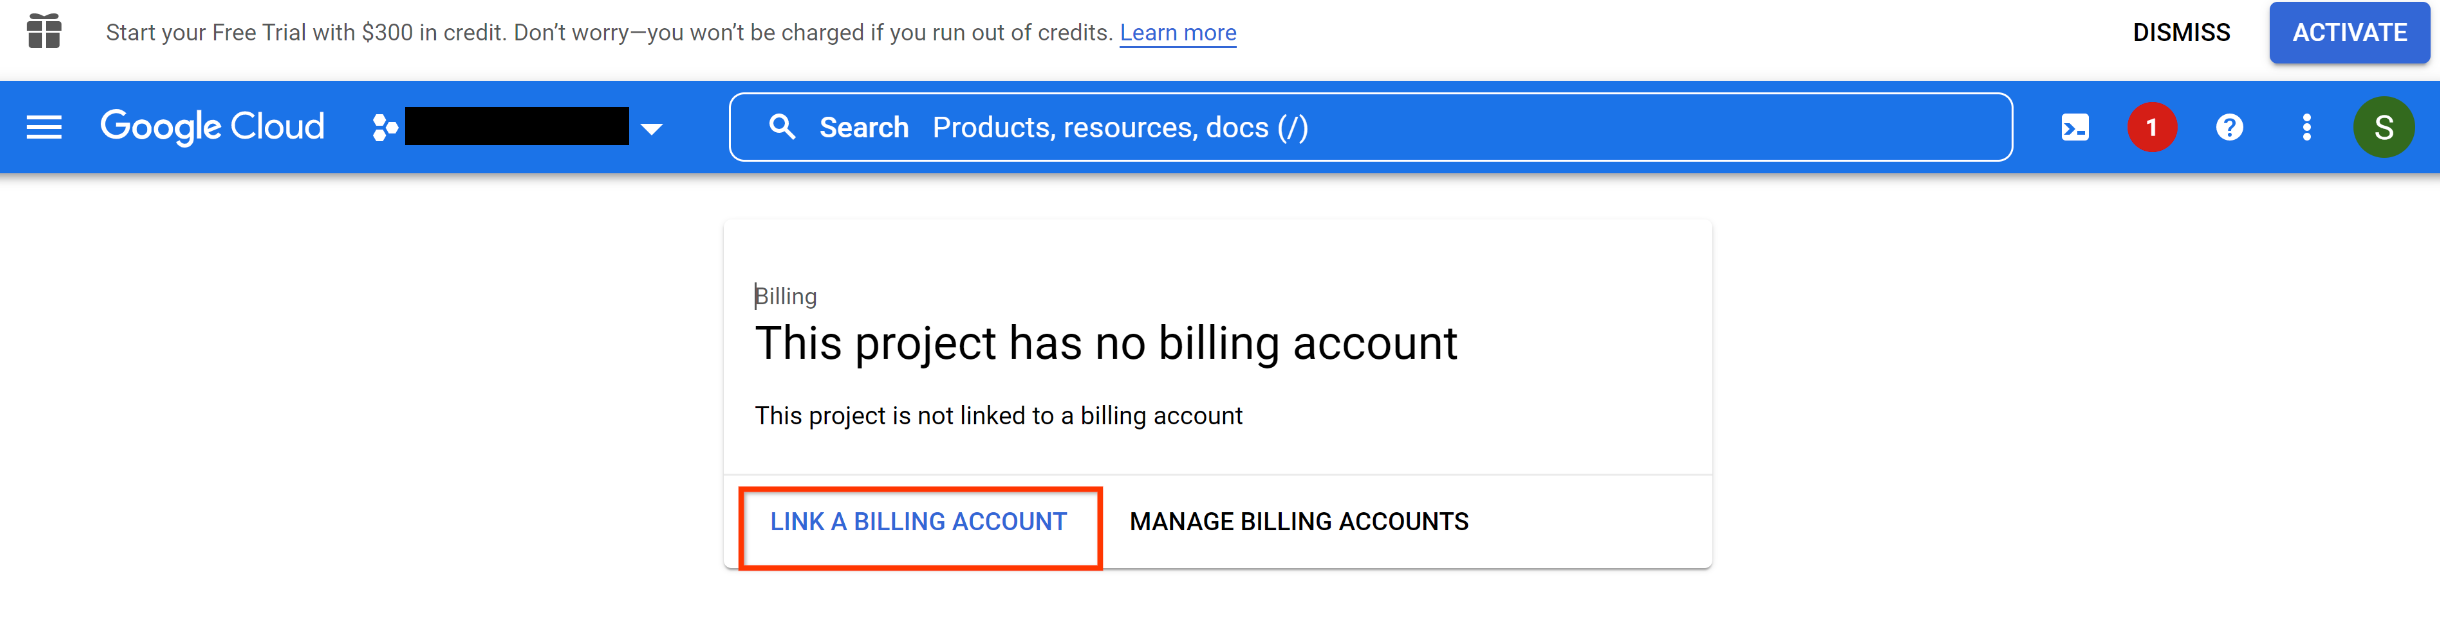 Screenshot of a page showing This project has no billing account, highlighting Link a billing account button.